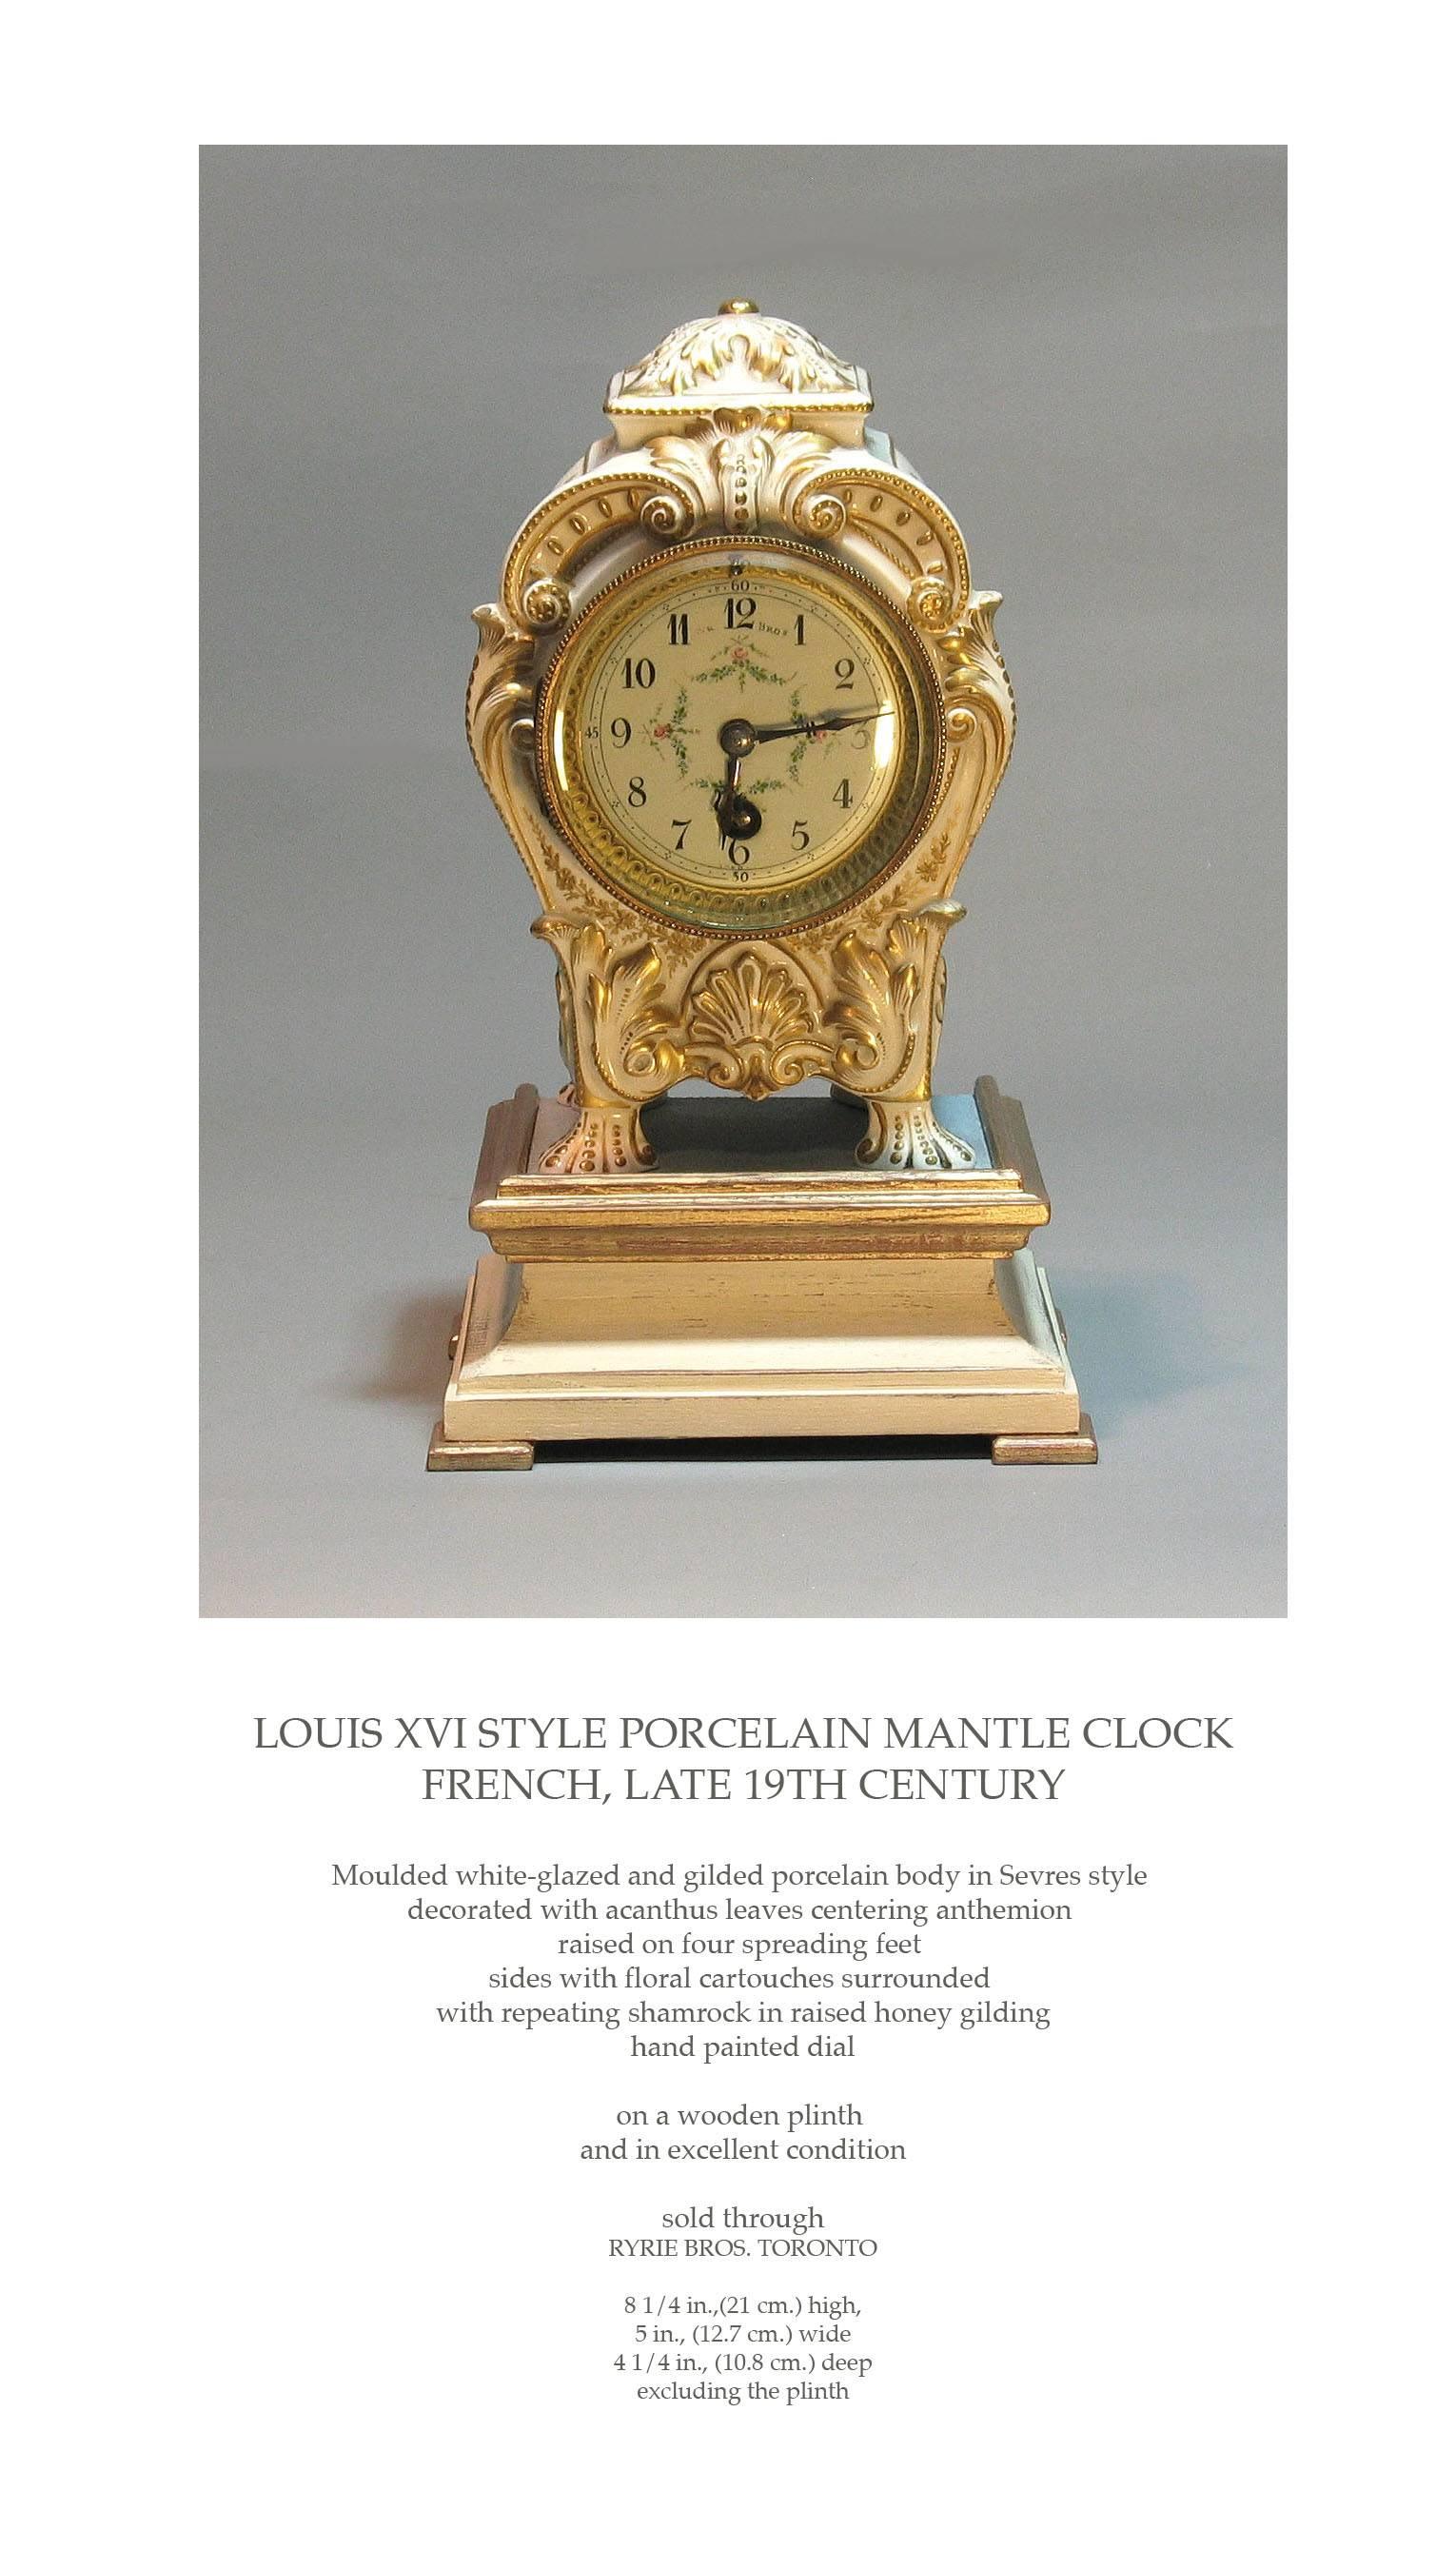 Louis XVI Style Porcelain Mantle Clock, French, Late 19th Century. Molded white glazed and gilded porcelain body in Severes style decorated with acanthus leaves centering anthemion raised on four spreading feet. The sides are with floral cartouches